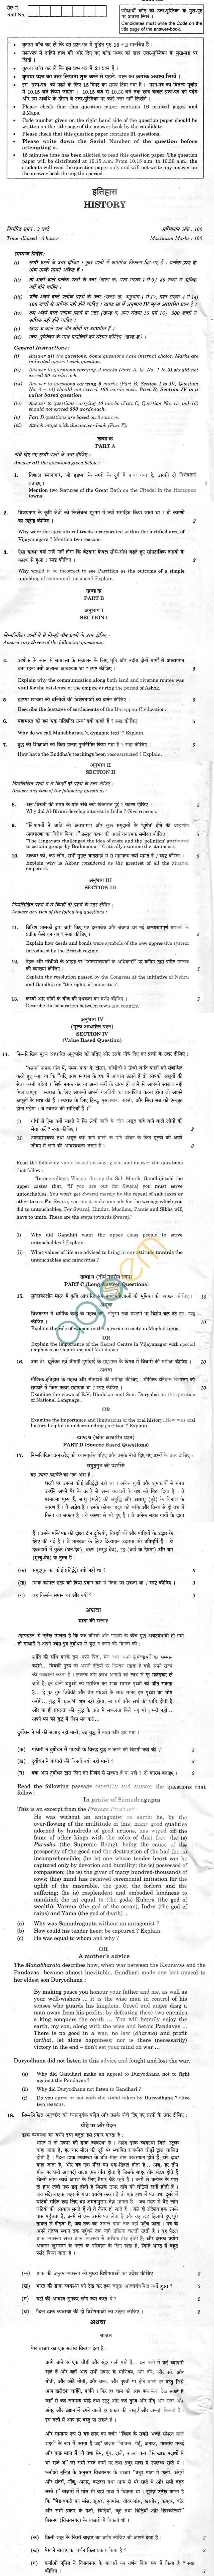 CBSE Compartment Exam 2013 Class XII Question Paper - History